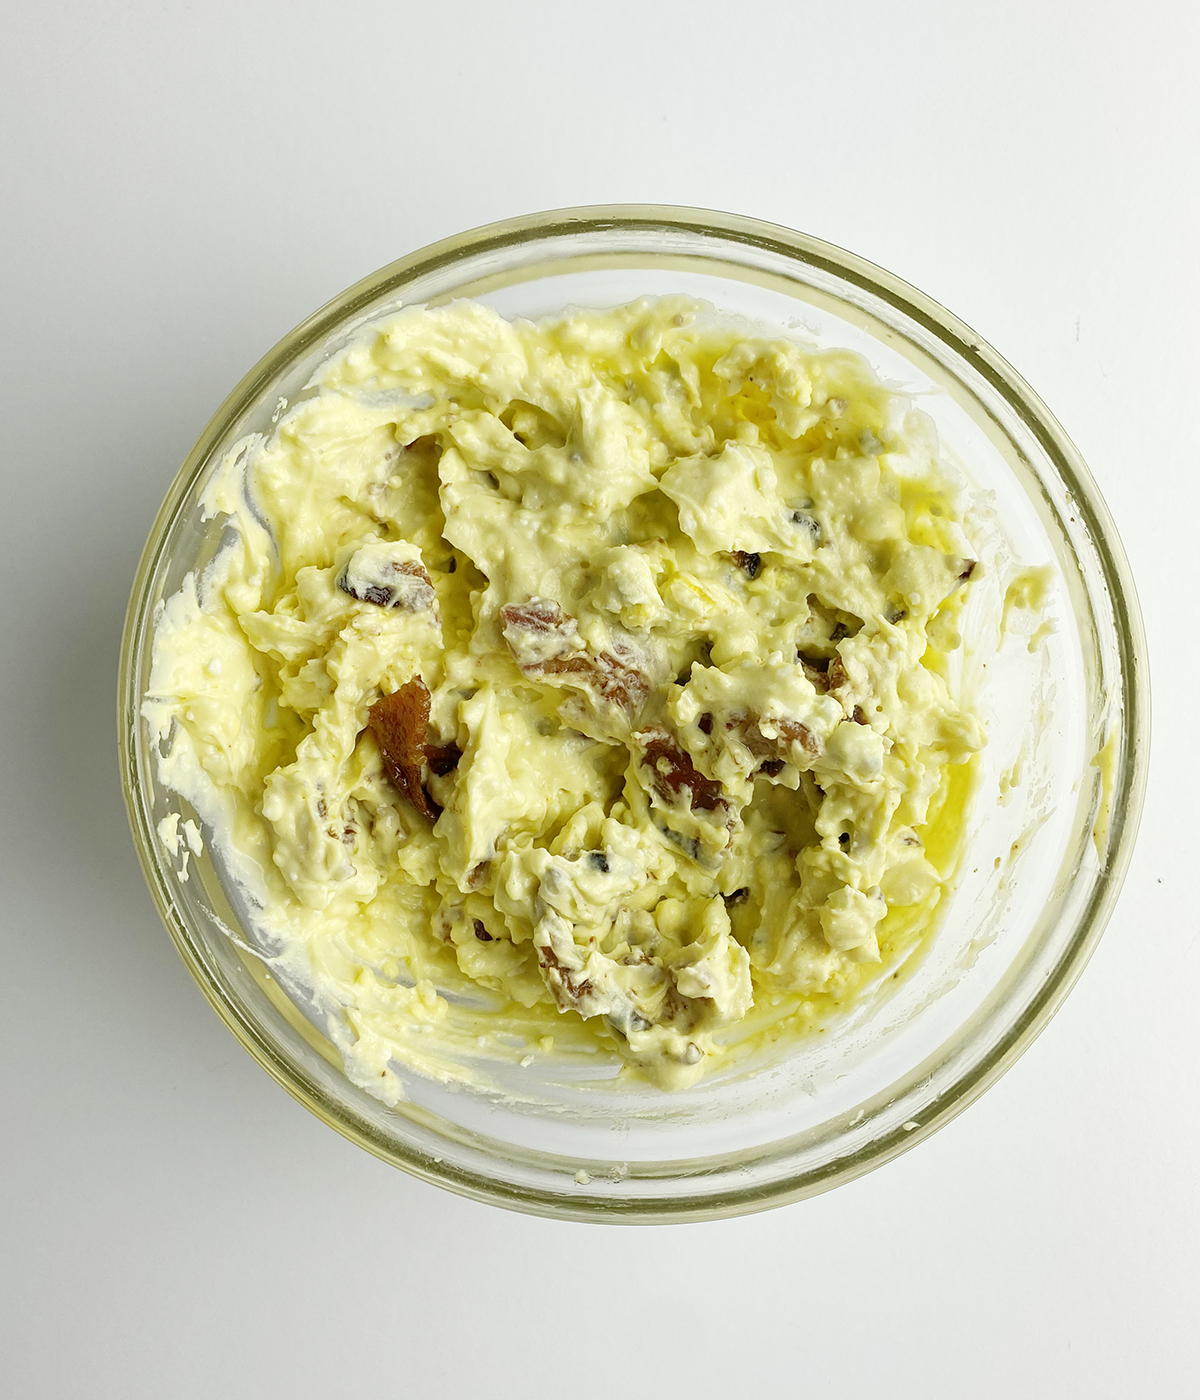 Bacon blue cheese deviled egg yolk mixture in a mixing bowl.